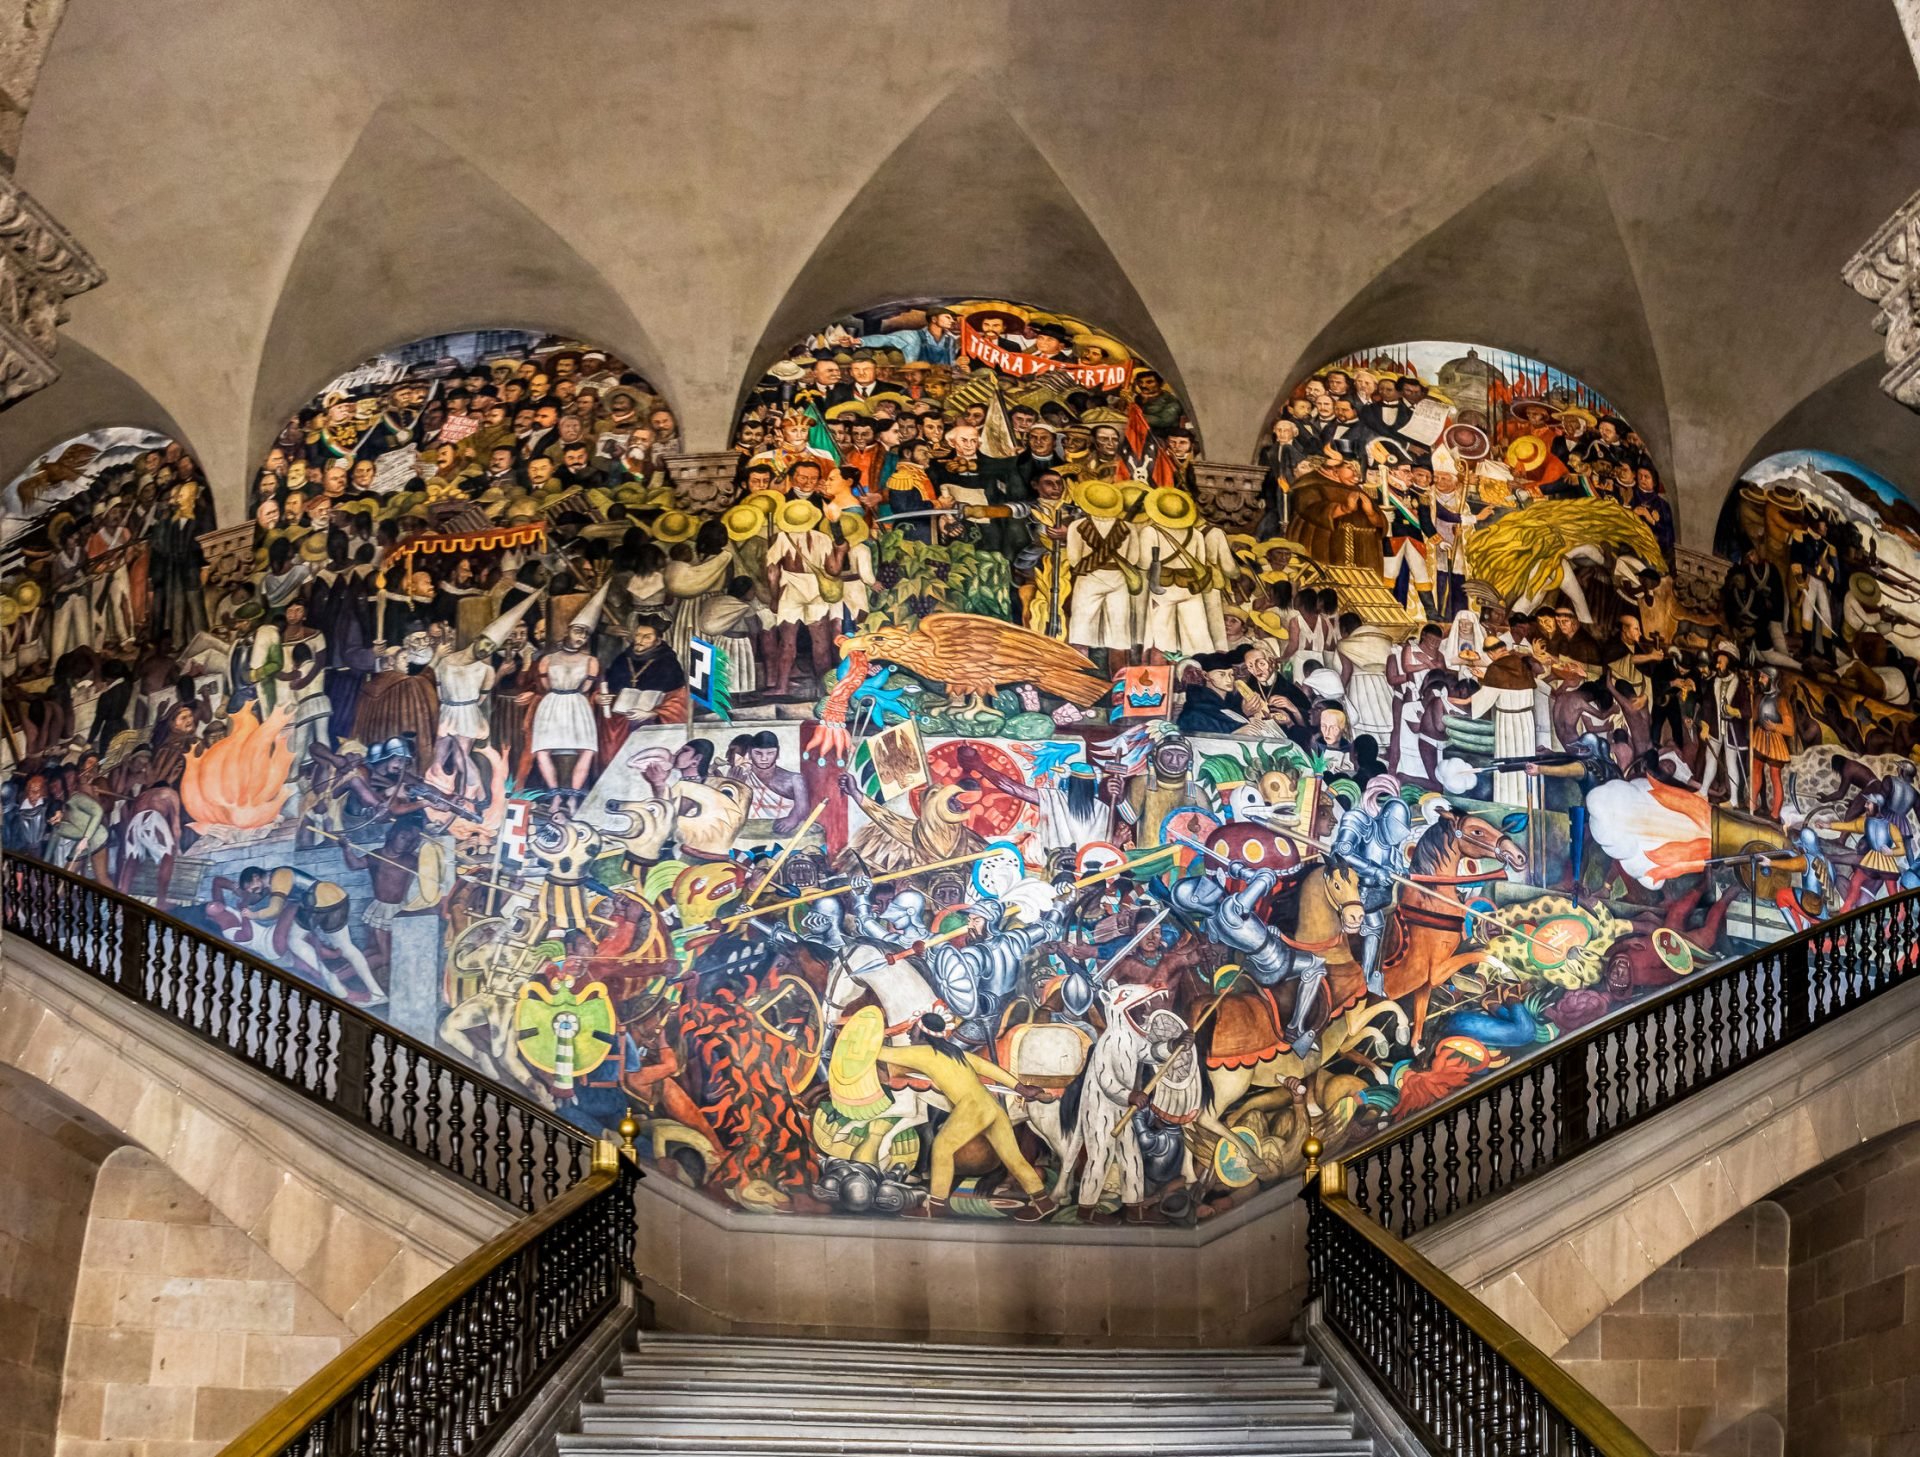 A photograph of a portion of the mural Epopeya del pueblo Mexicano that extends over 276 square meters and covers several centuries of the history of Mexico.